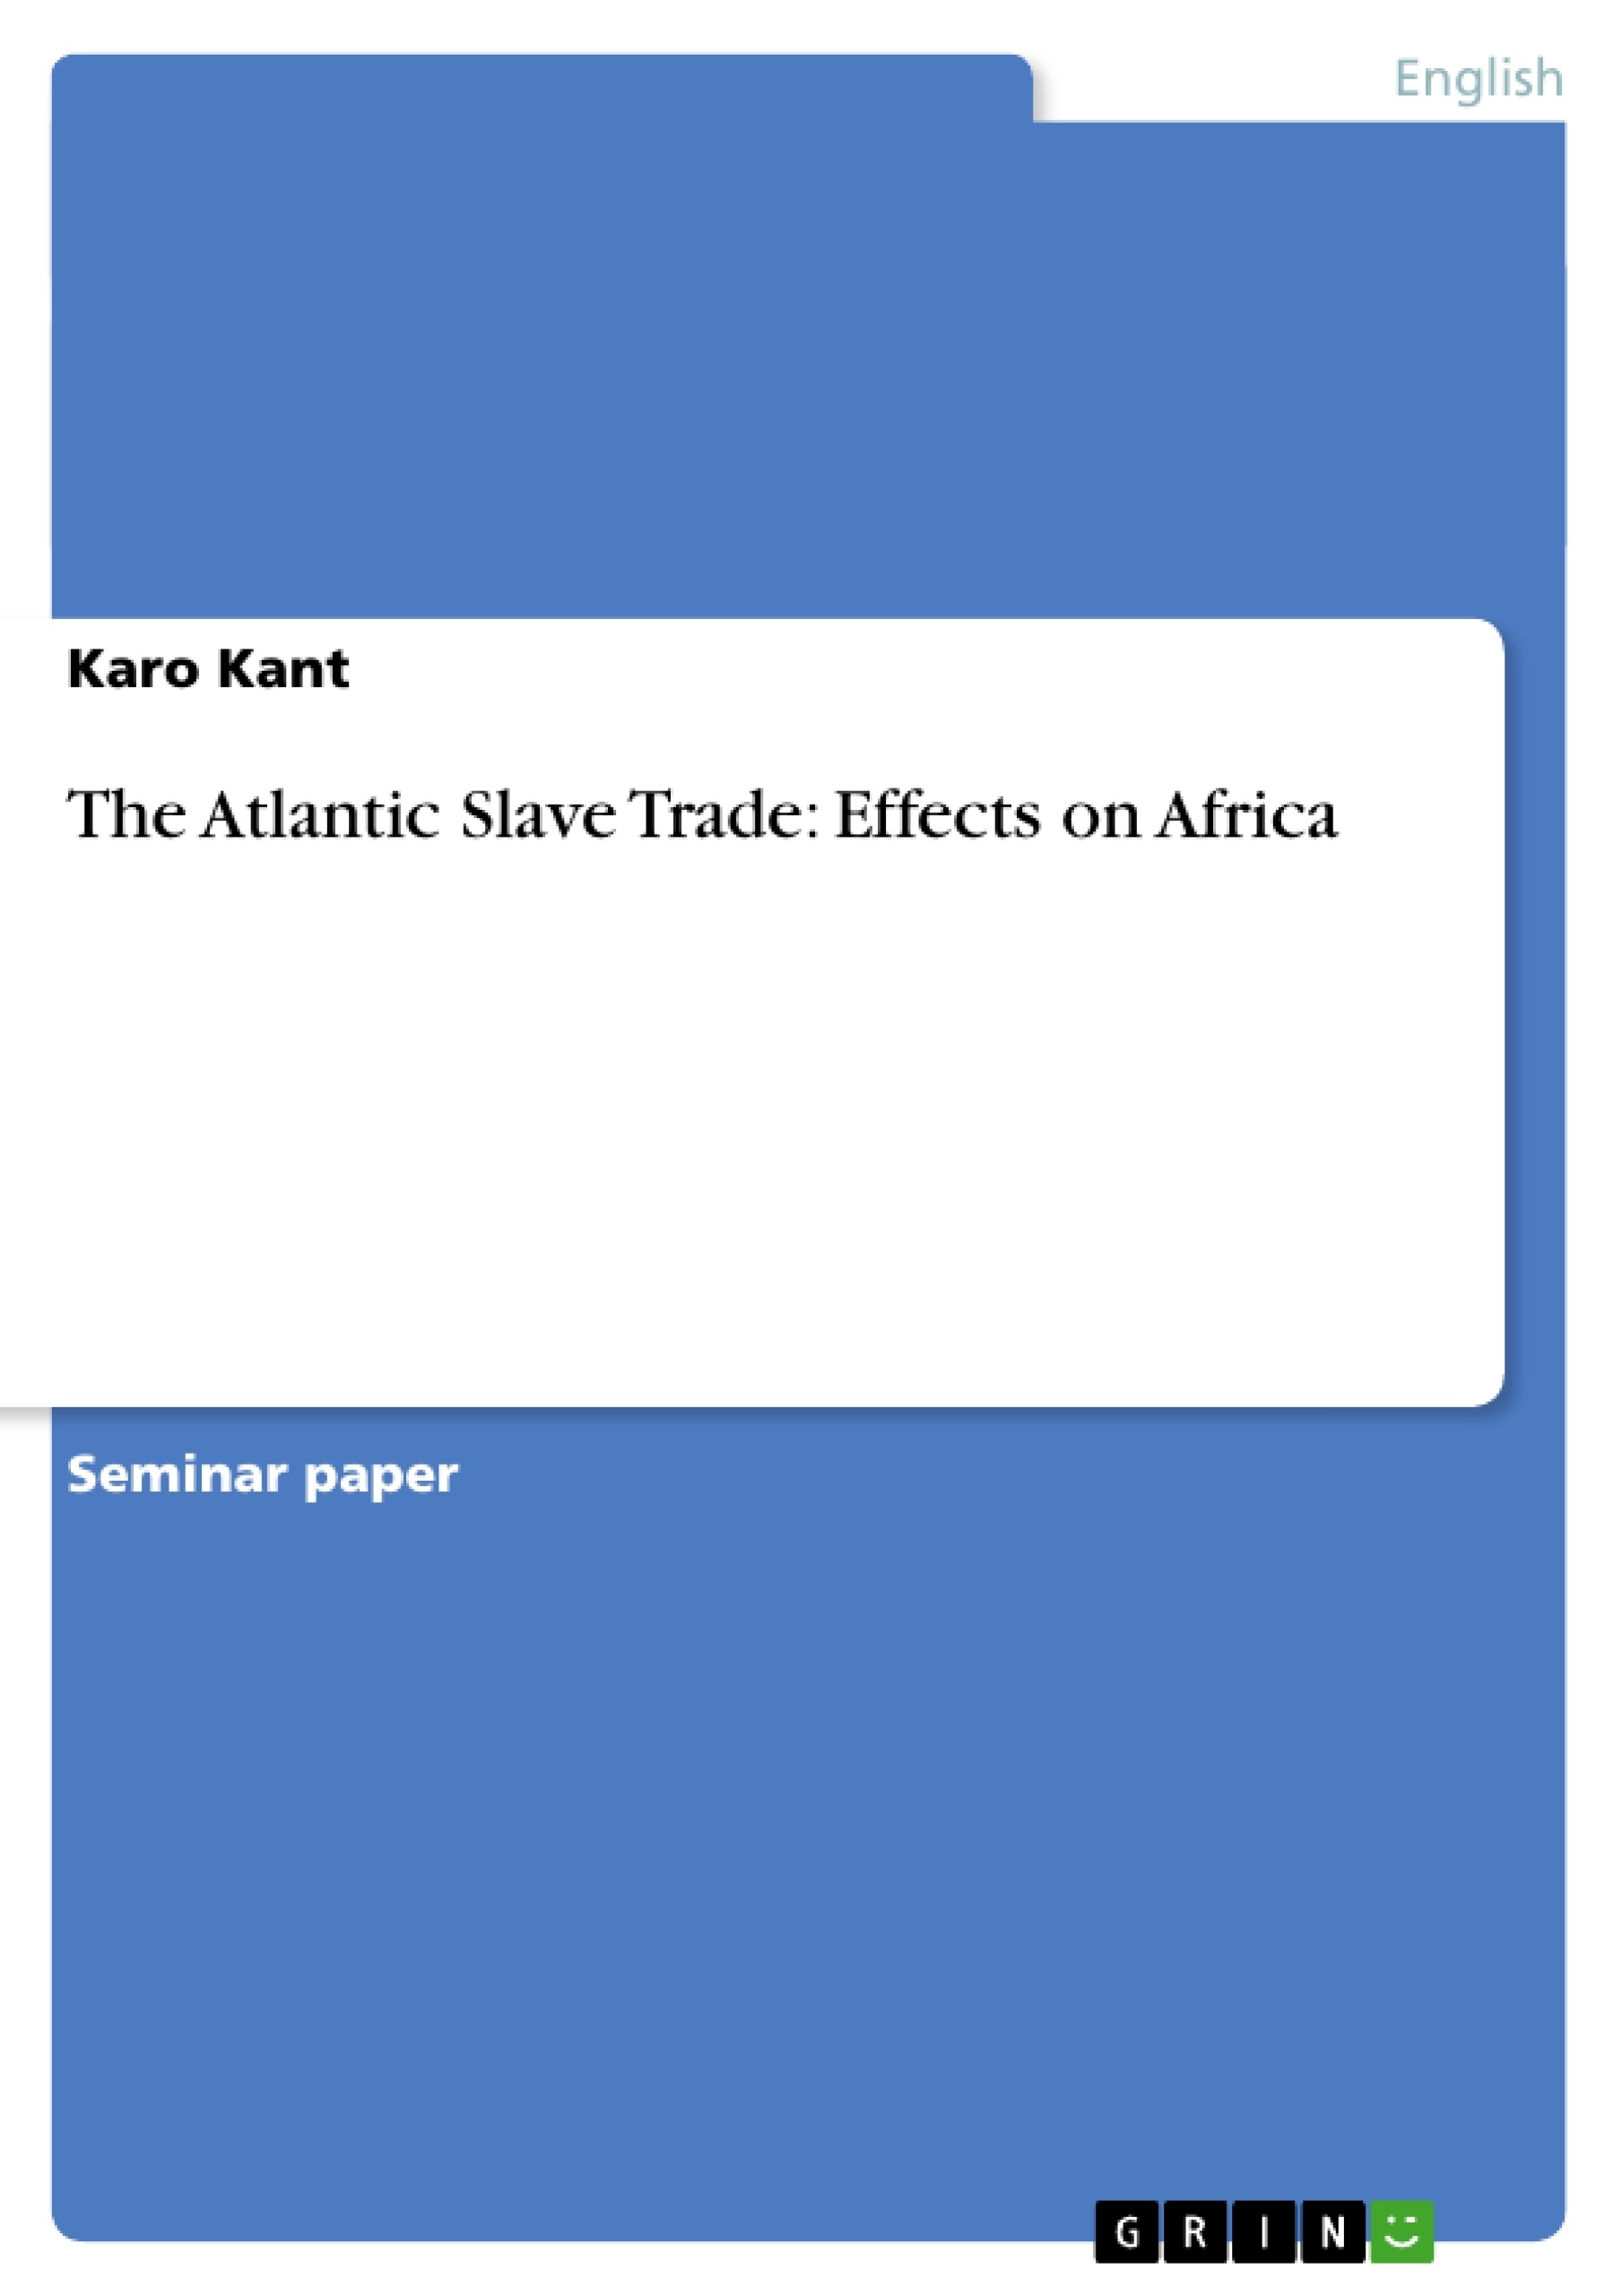 Título: The Atlantic Slave Trade: Effects on Africa